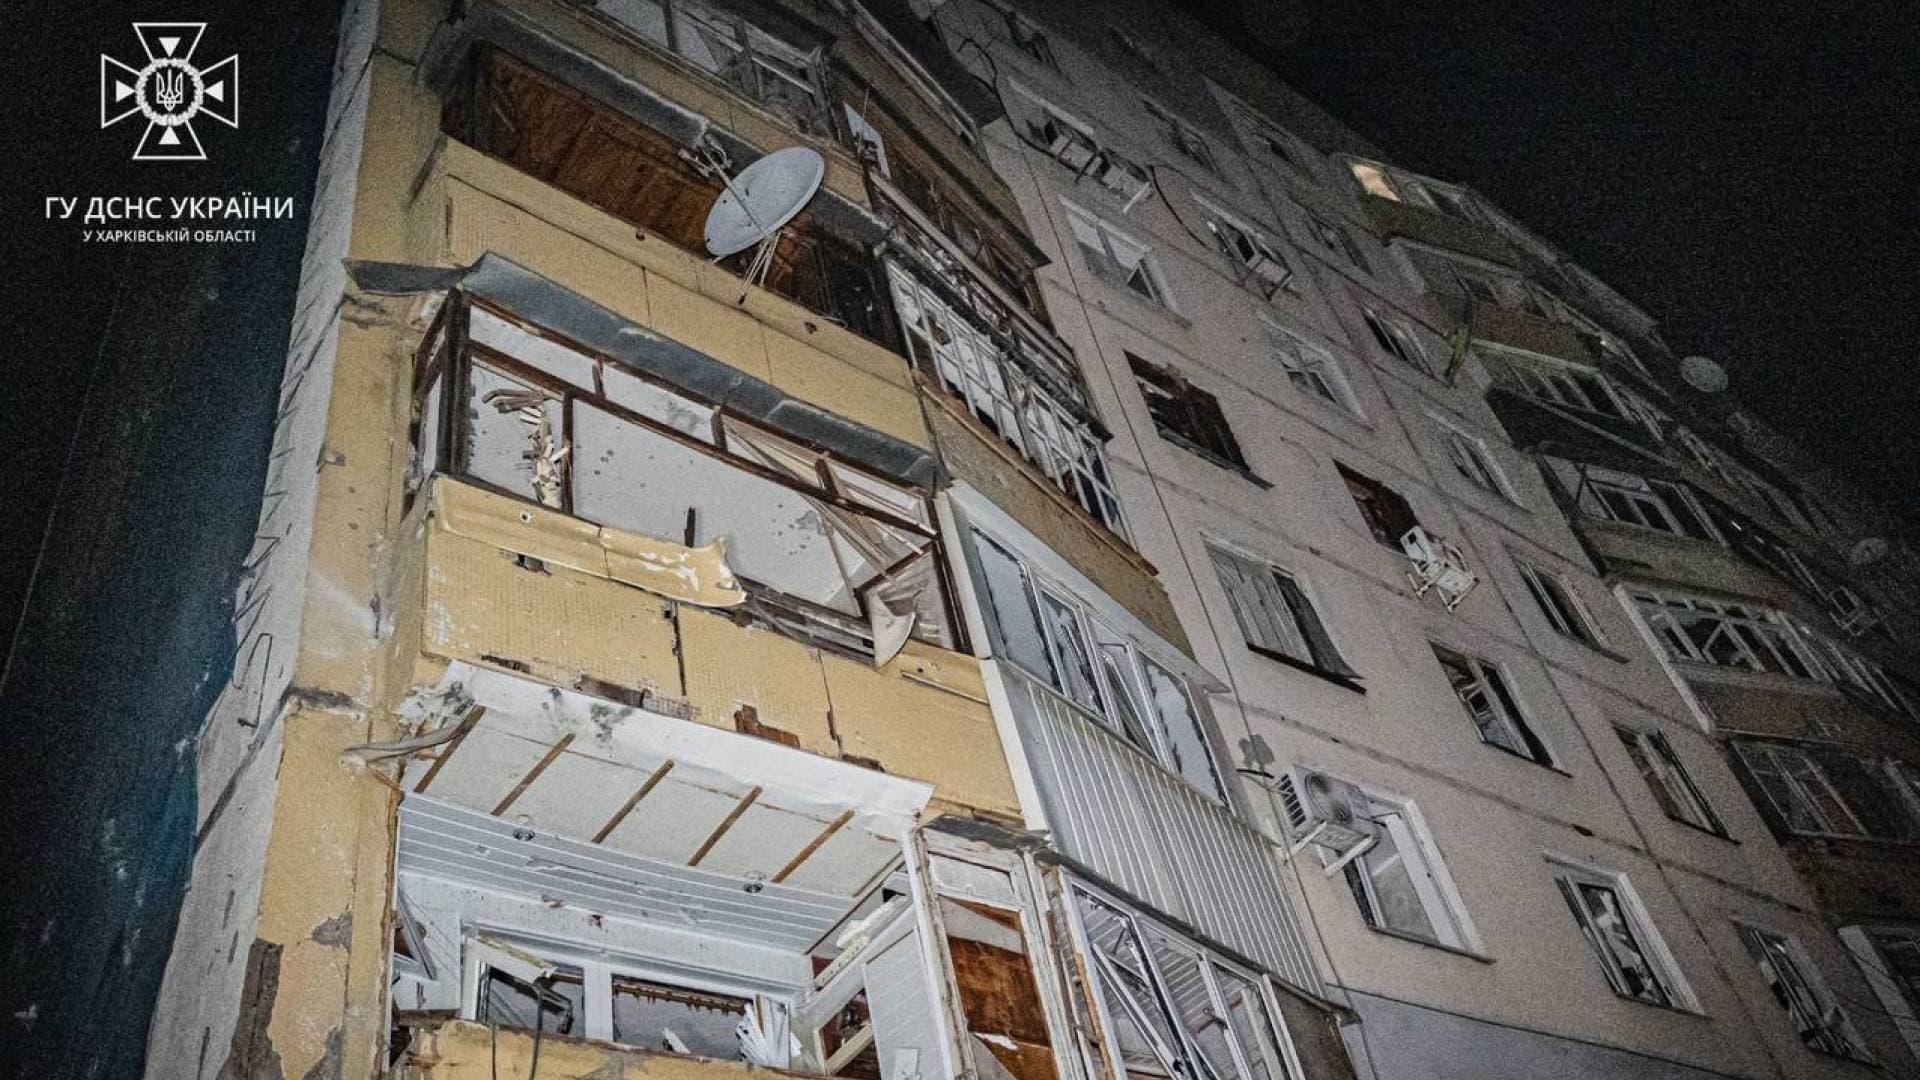 a damaged building in the aftermath of a drone attack in Kharkiv